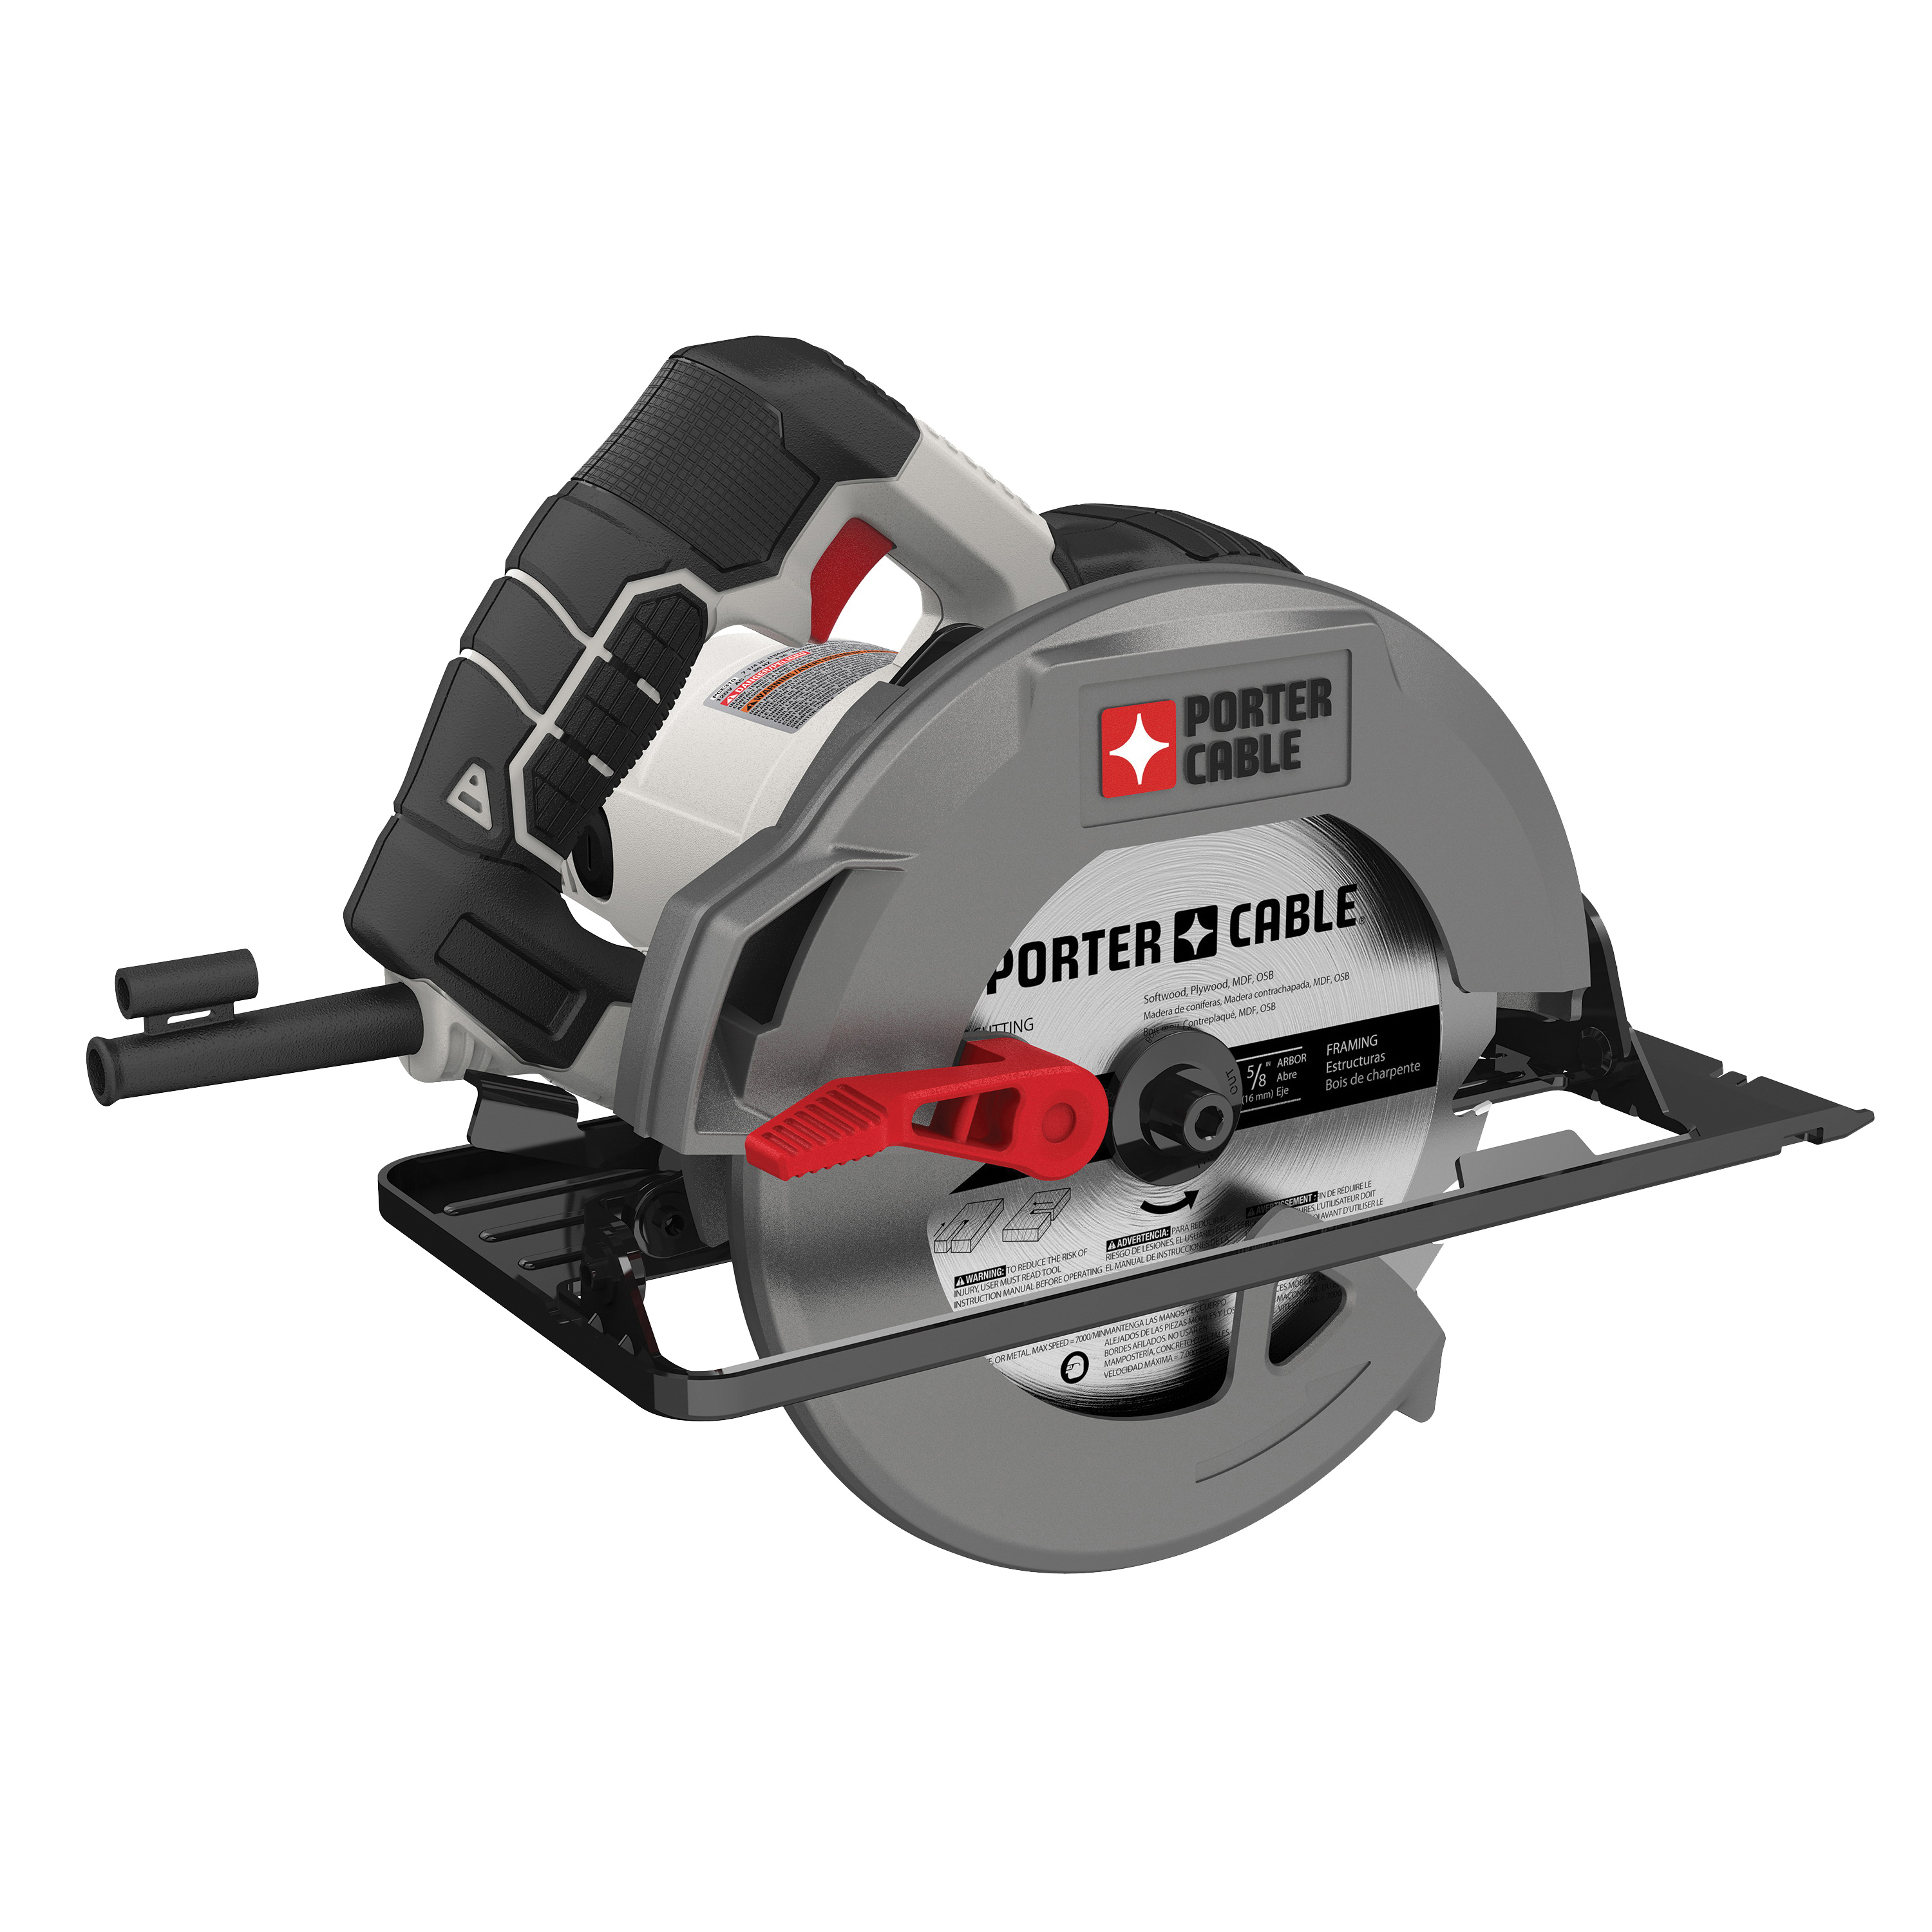 Buy Porter Cable 7-1/4 In. Heavy-Duty Circular Saw 15